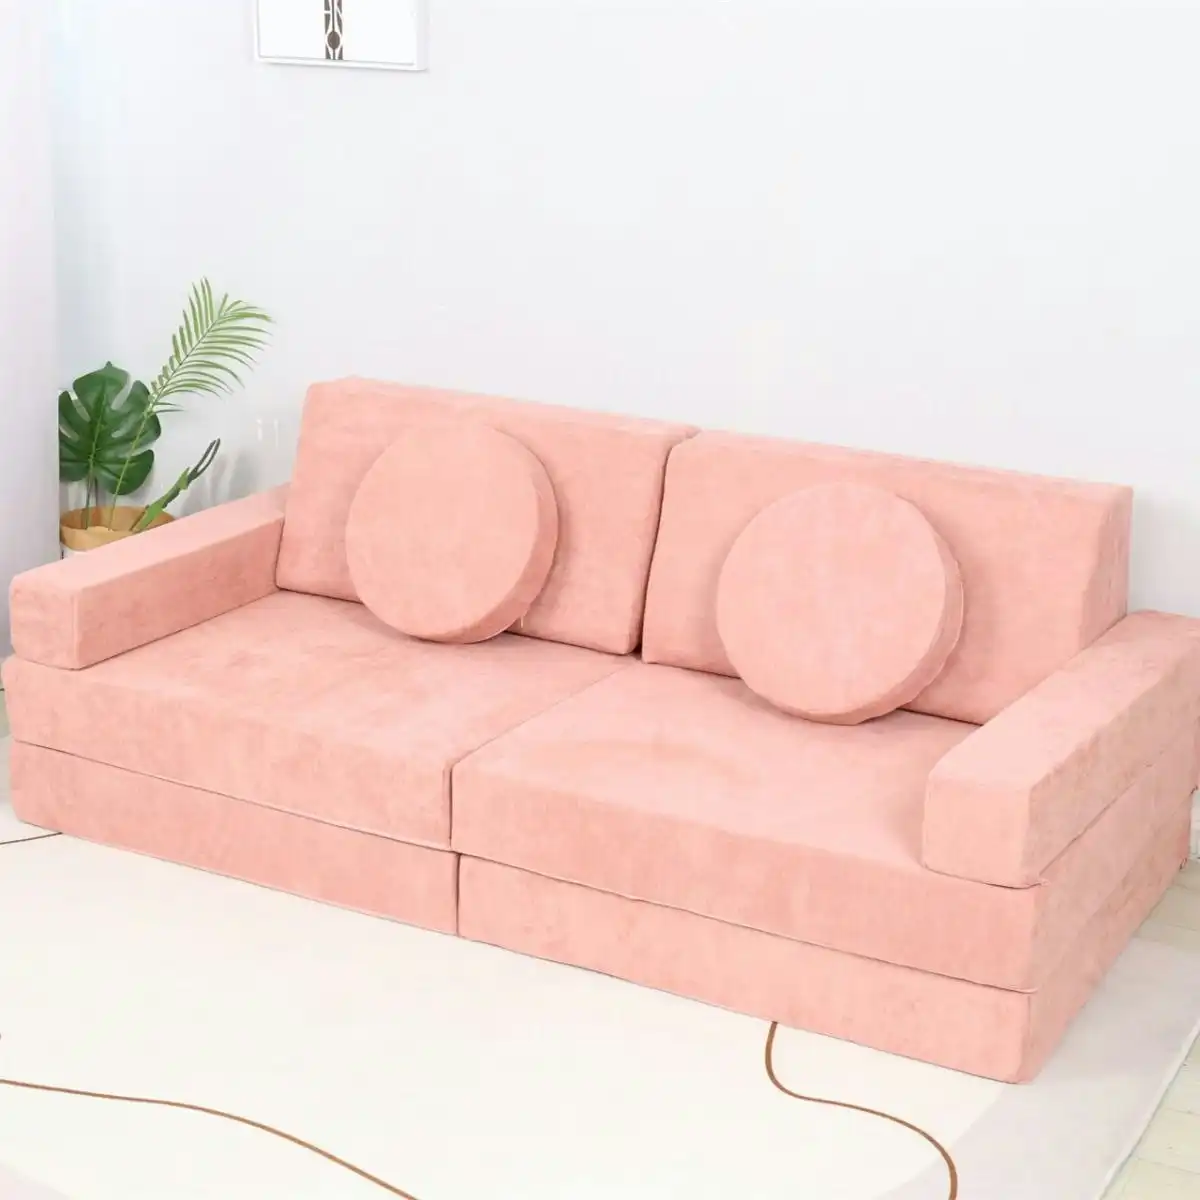 All 4 Kids Ethan 10 PCS Play Couch - Rose